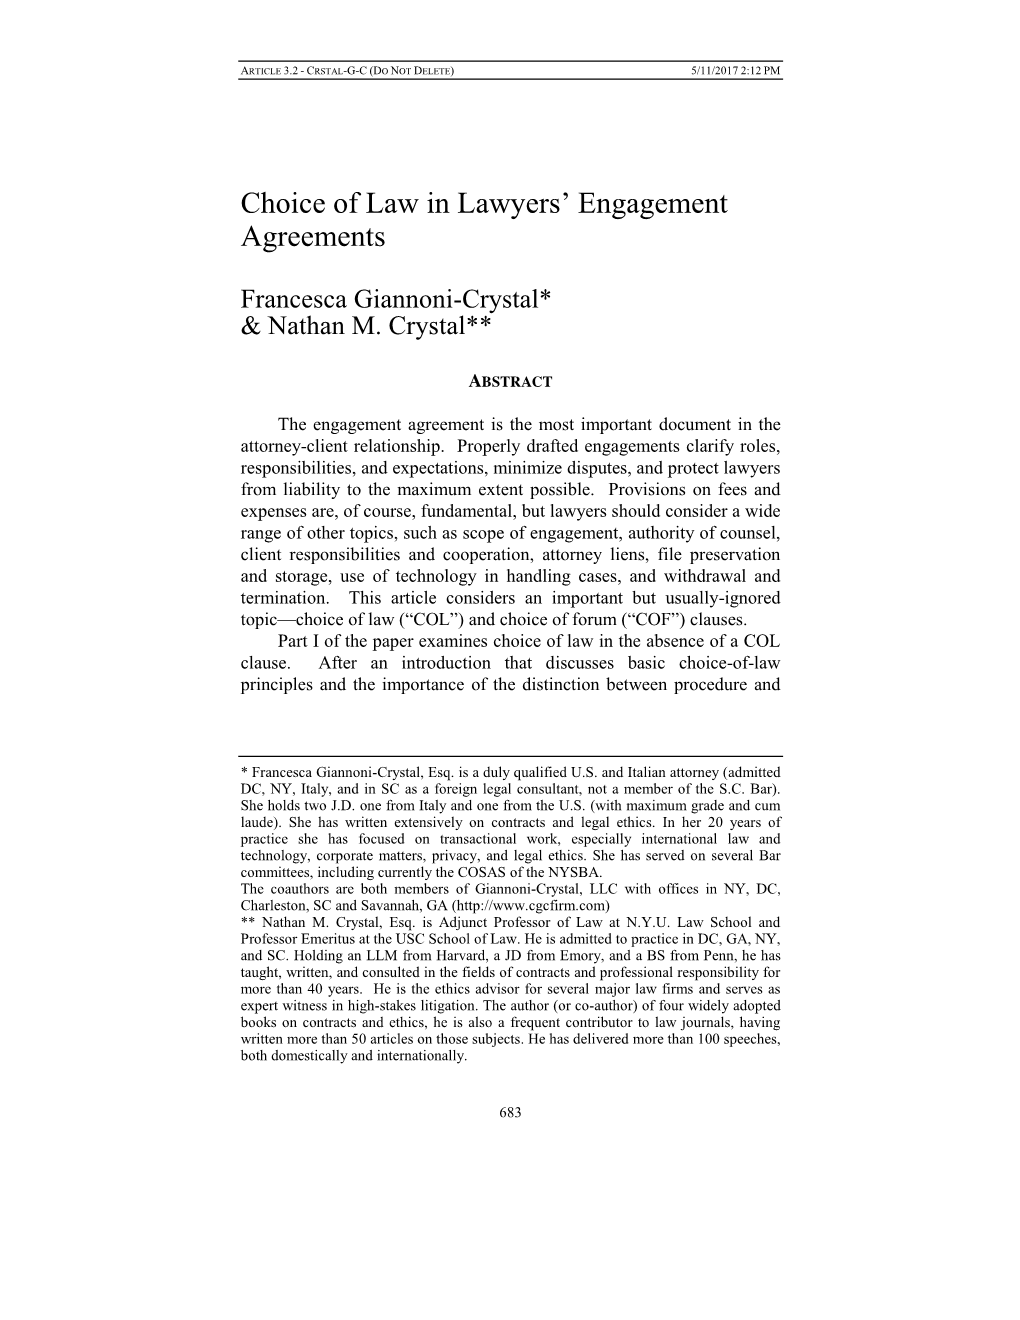 Choice of Law in Lawyers' Engagement Agreements